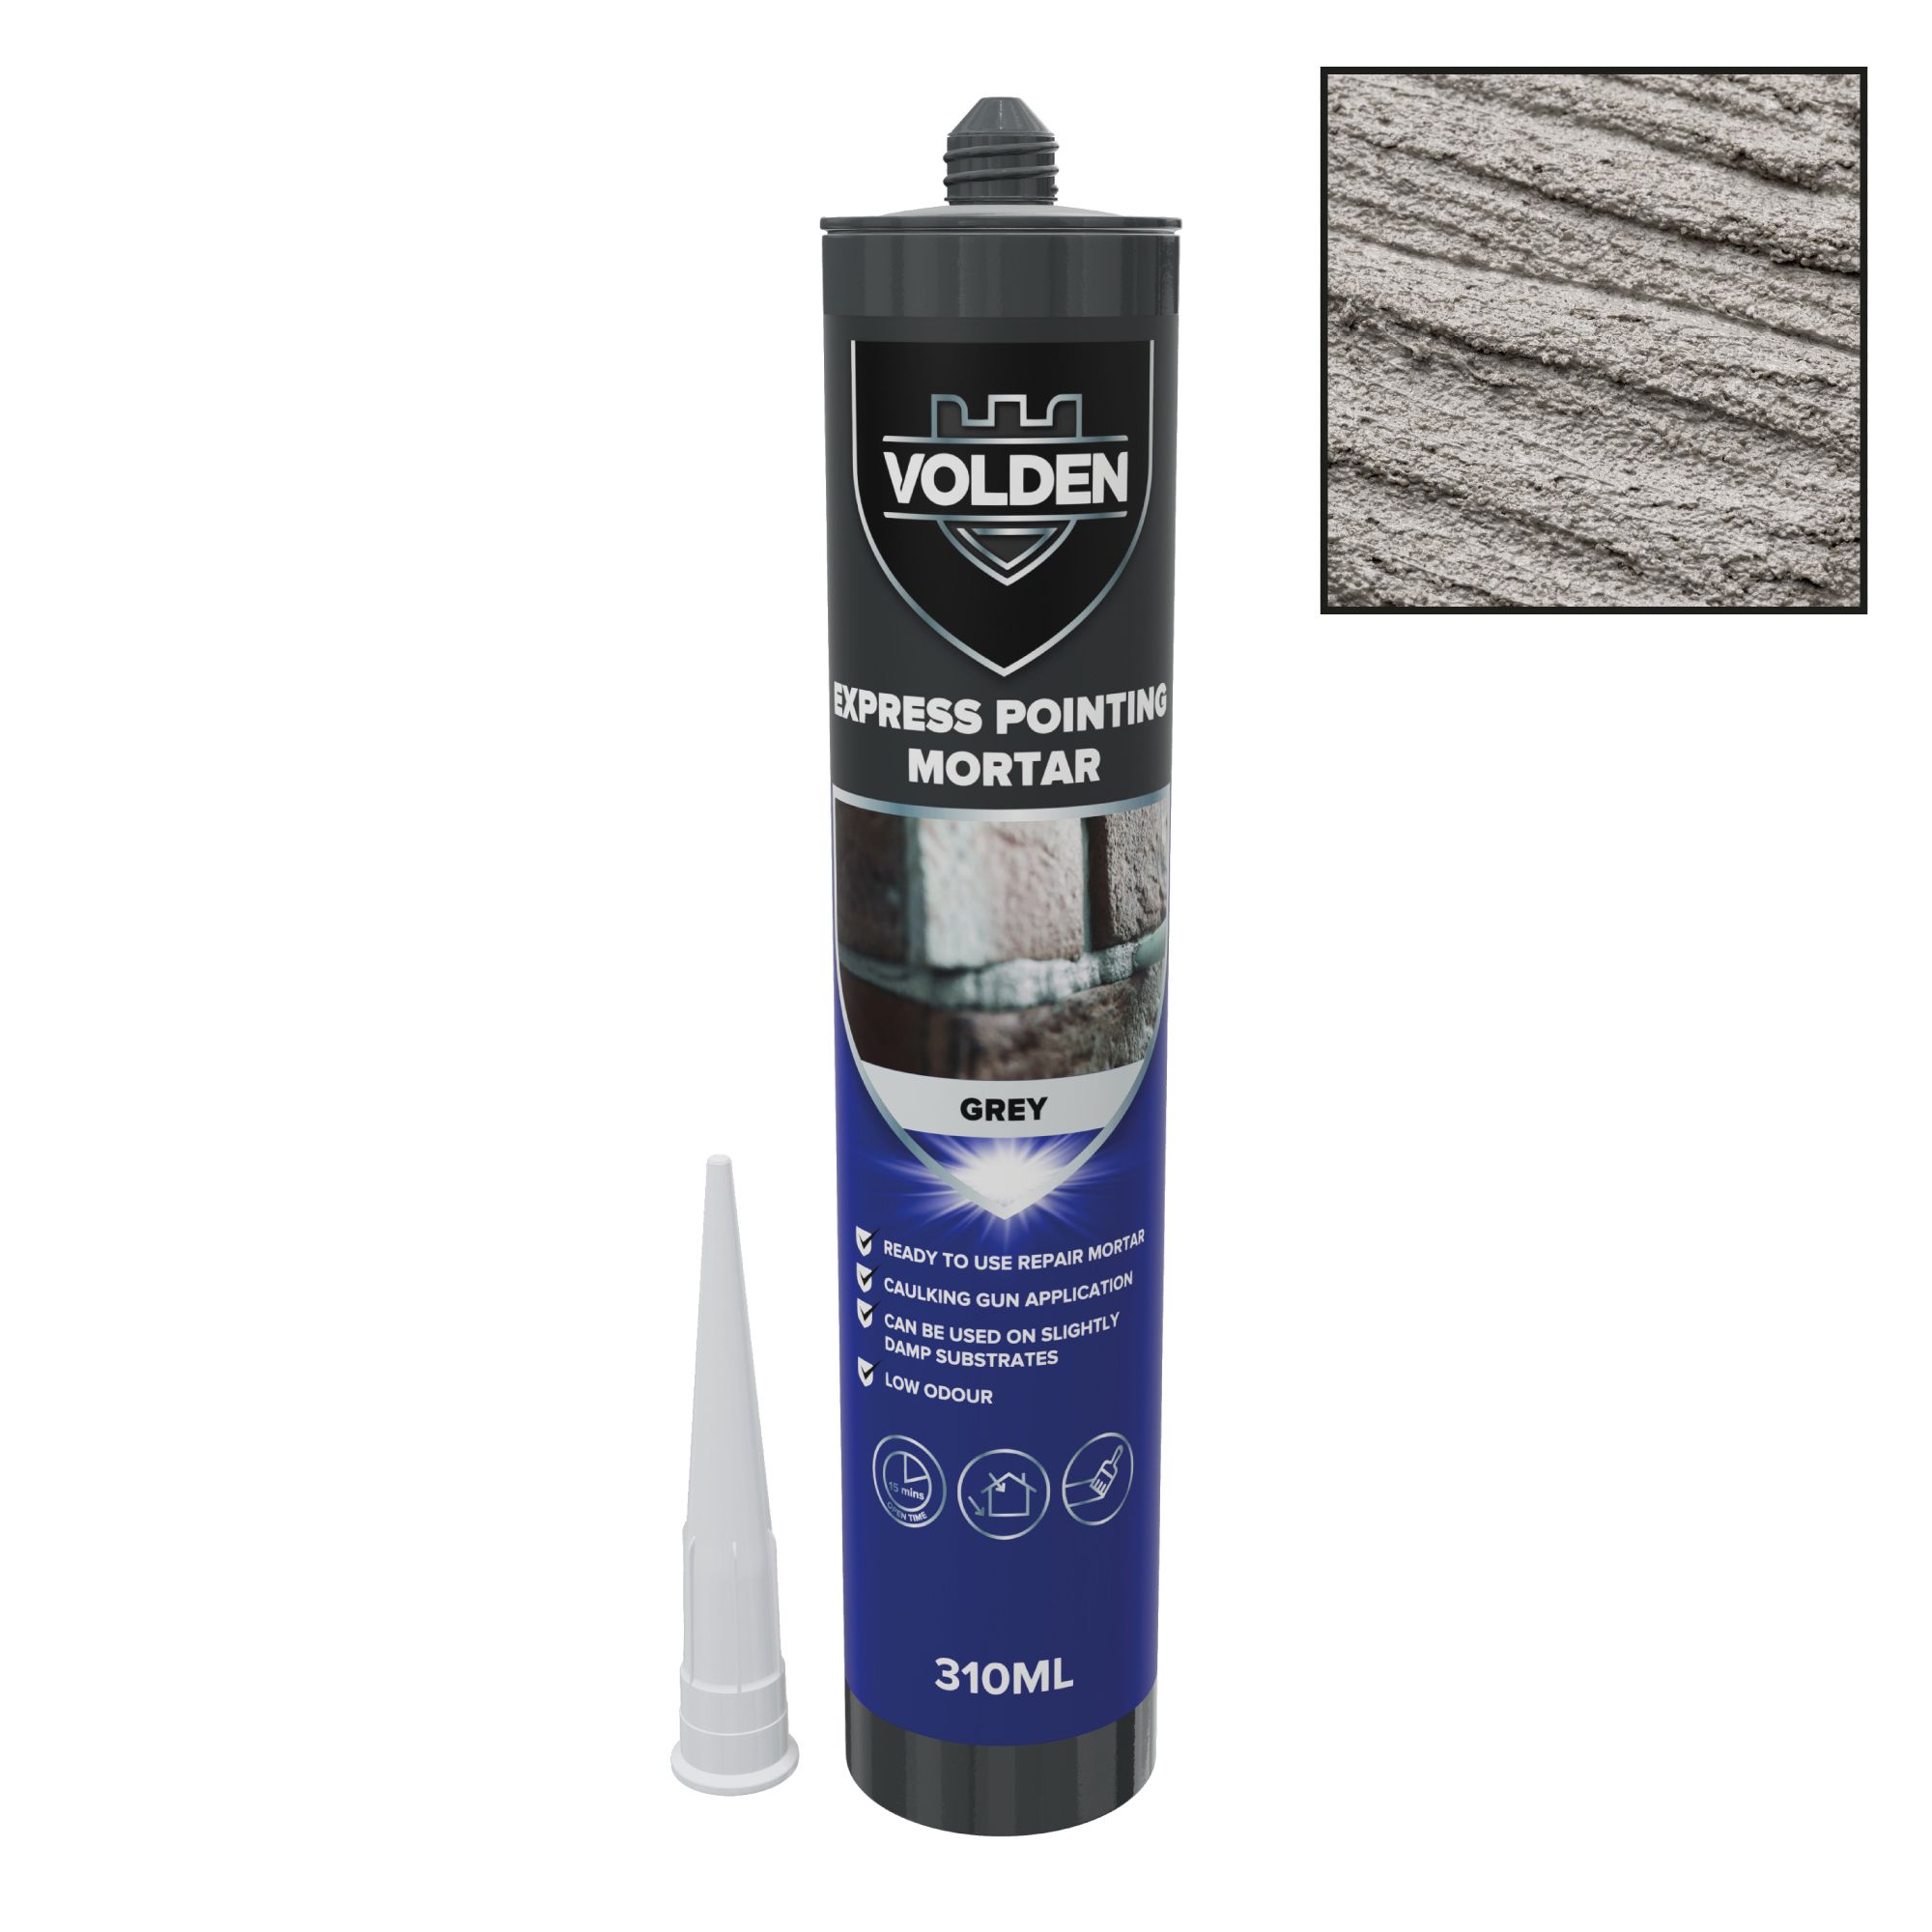 Volden Grey Pointing mortar, 310ml Cartridge - Ready for use